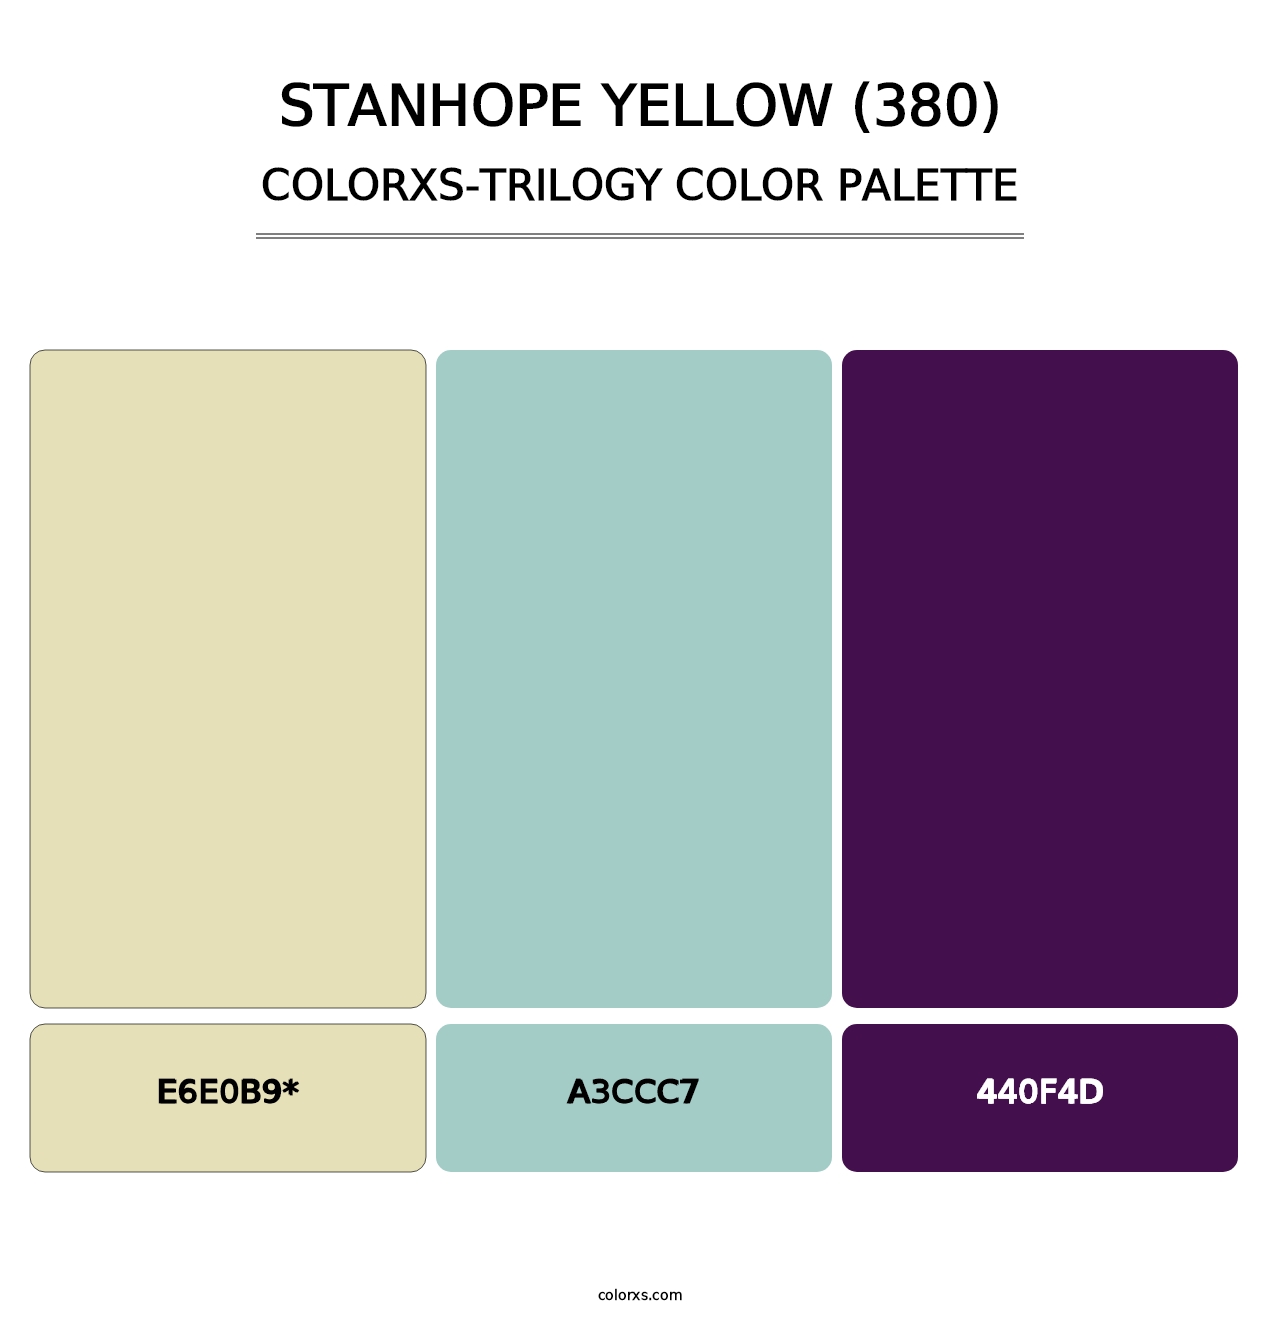 Stanhope Yellow (380) - Colorxs Trilogy Palette